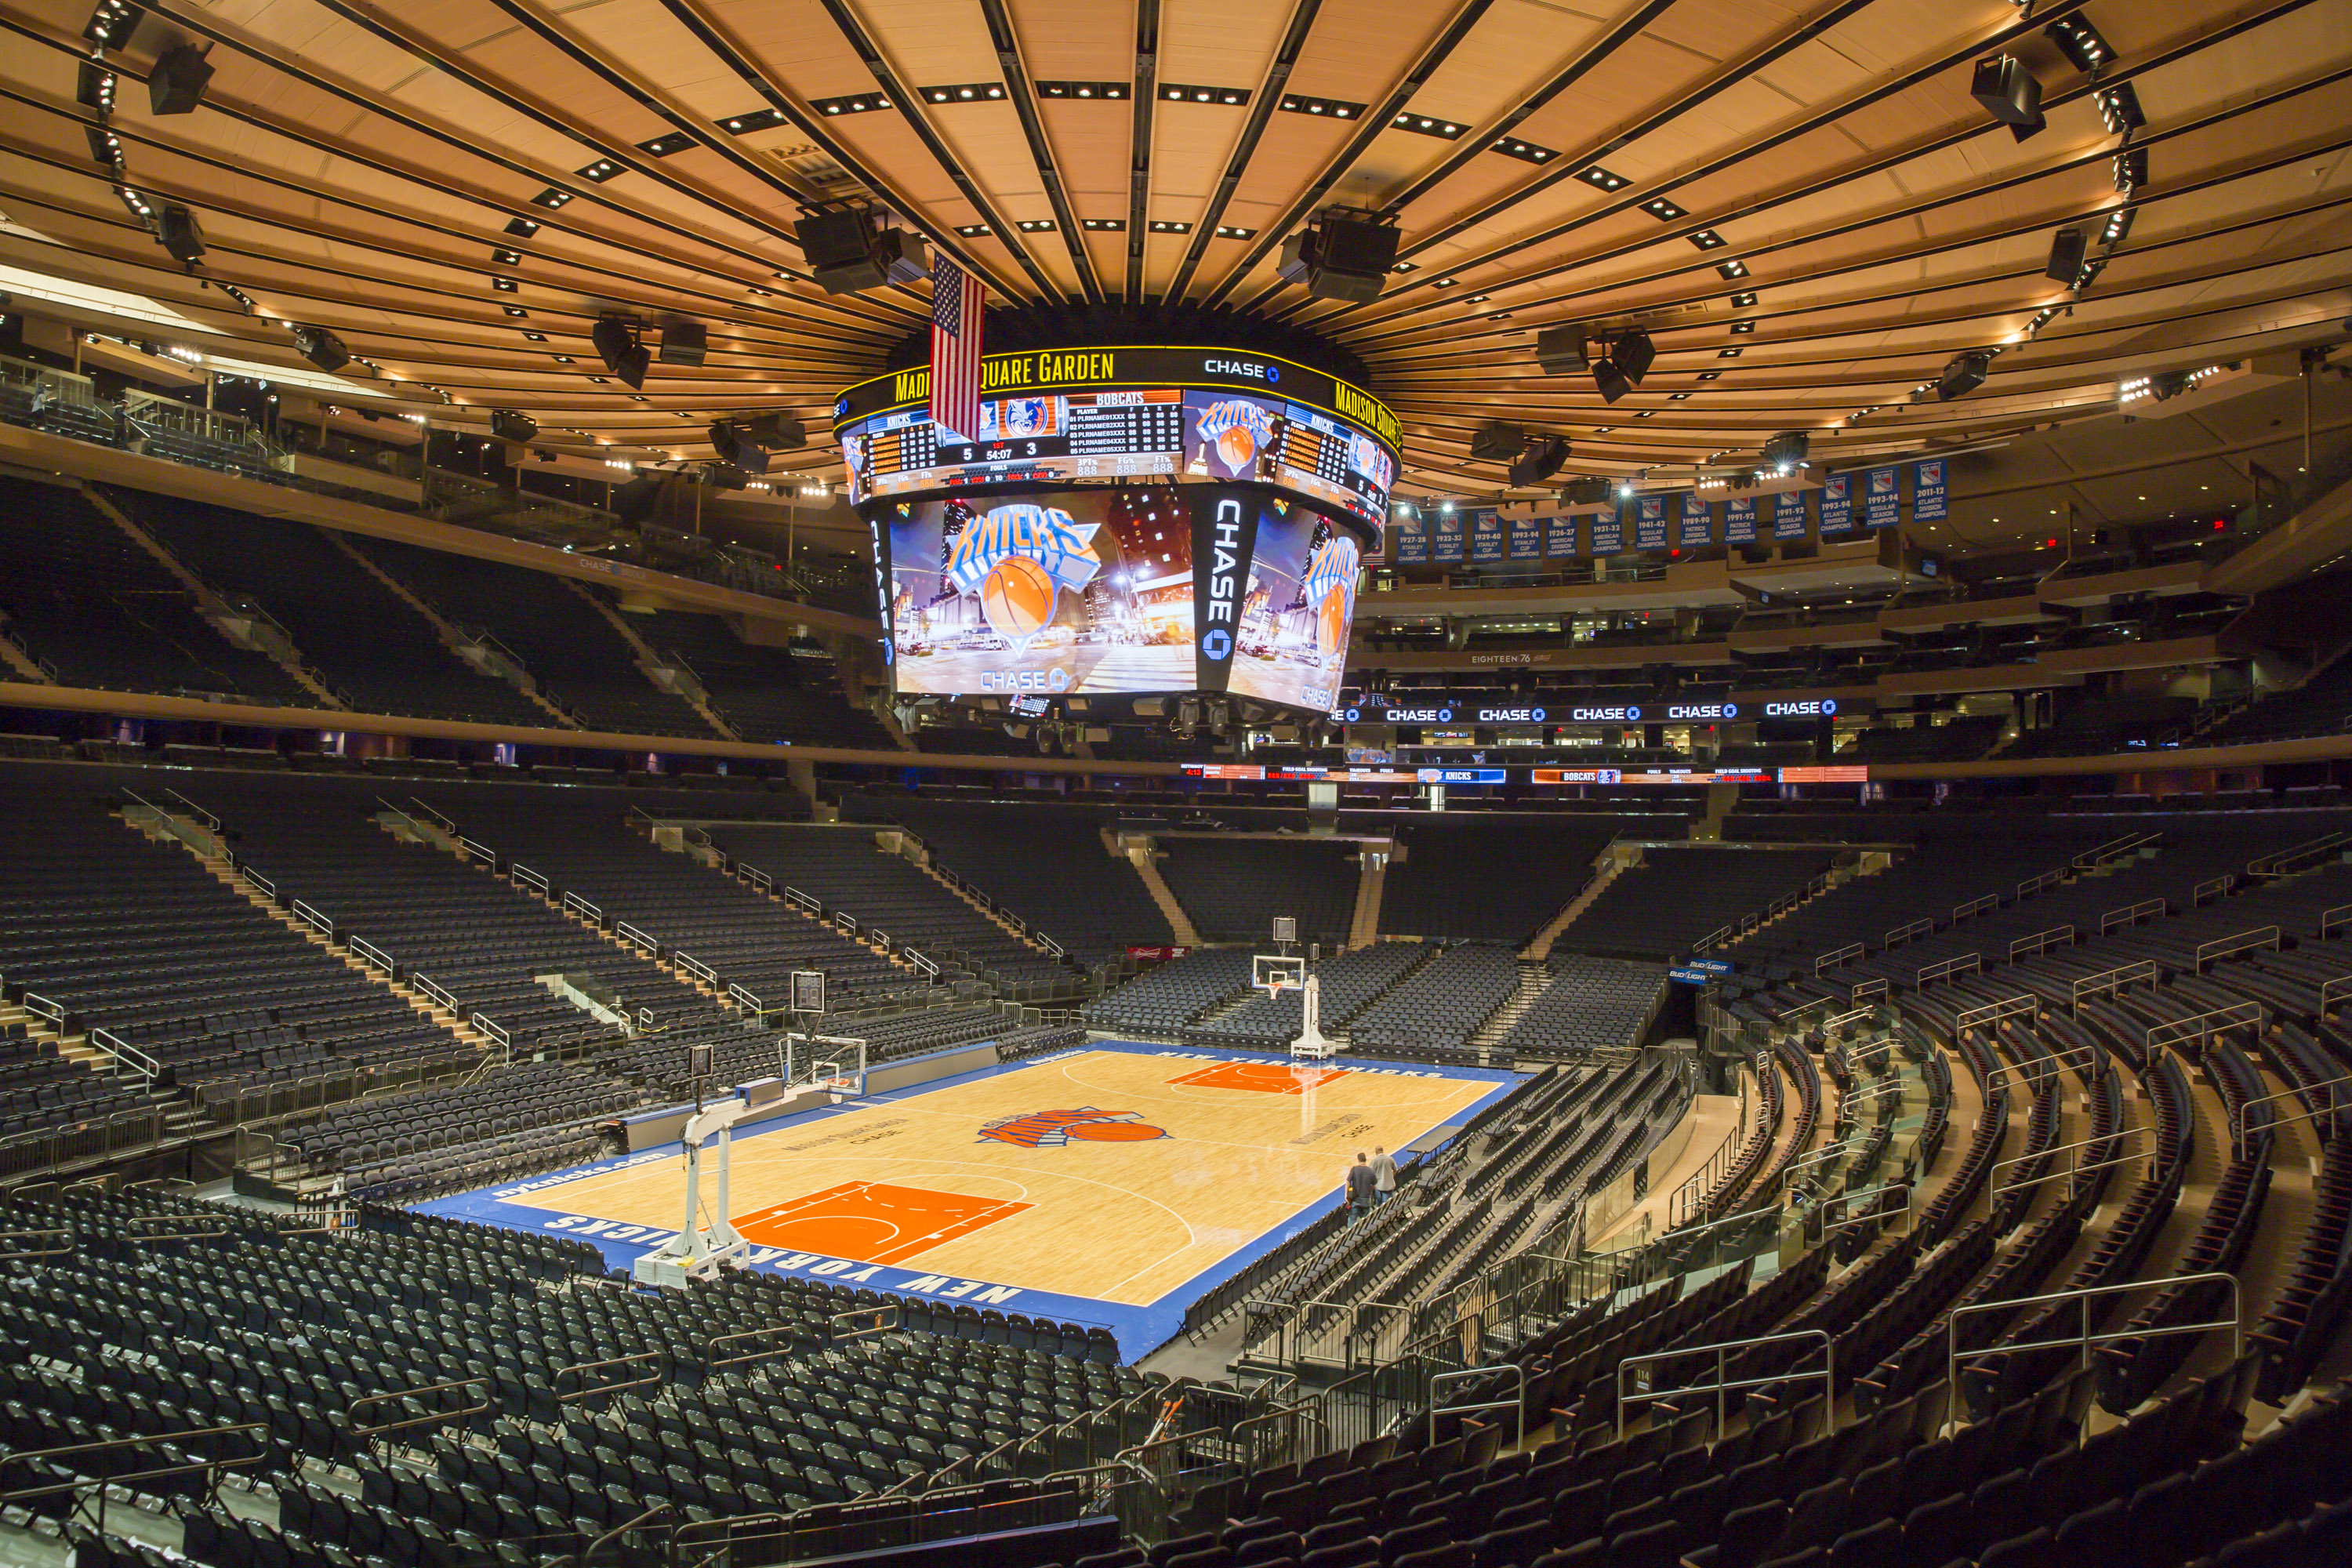 Madison Square Garden exec says arena reopening 'earlier than